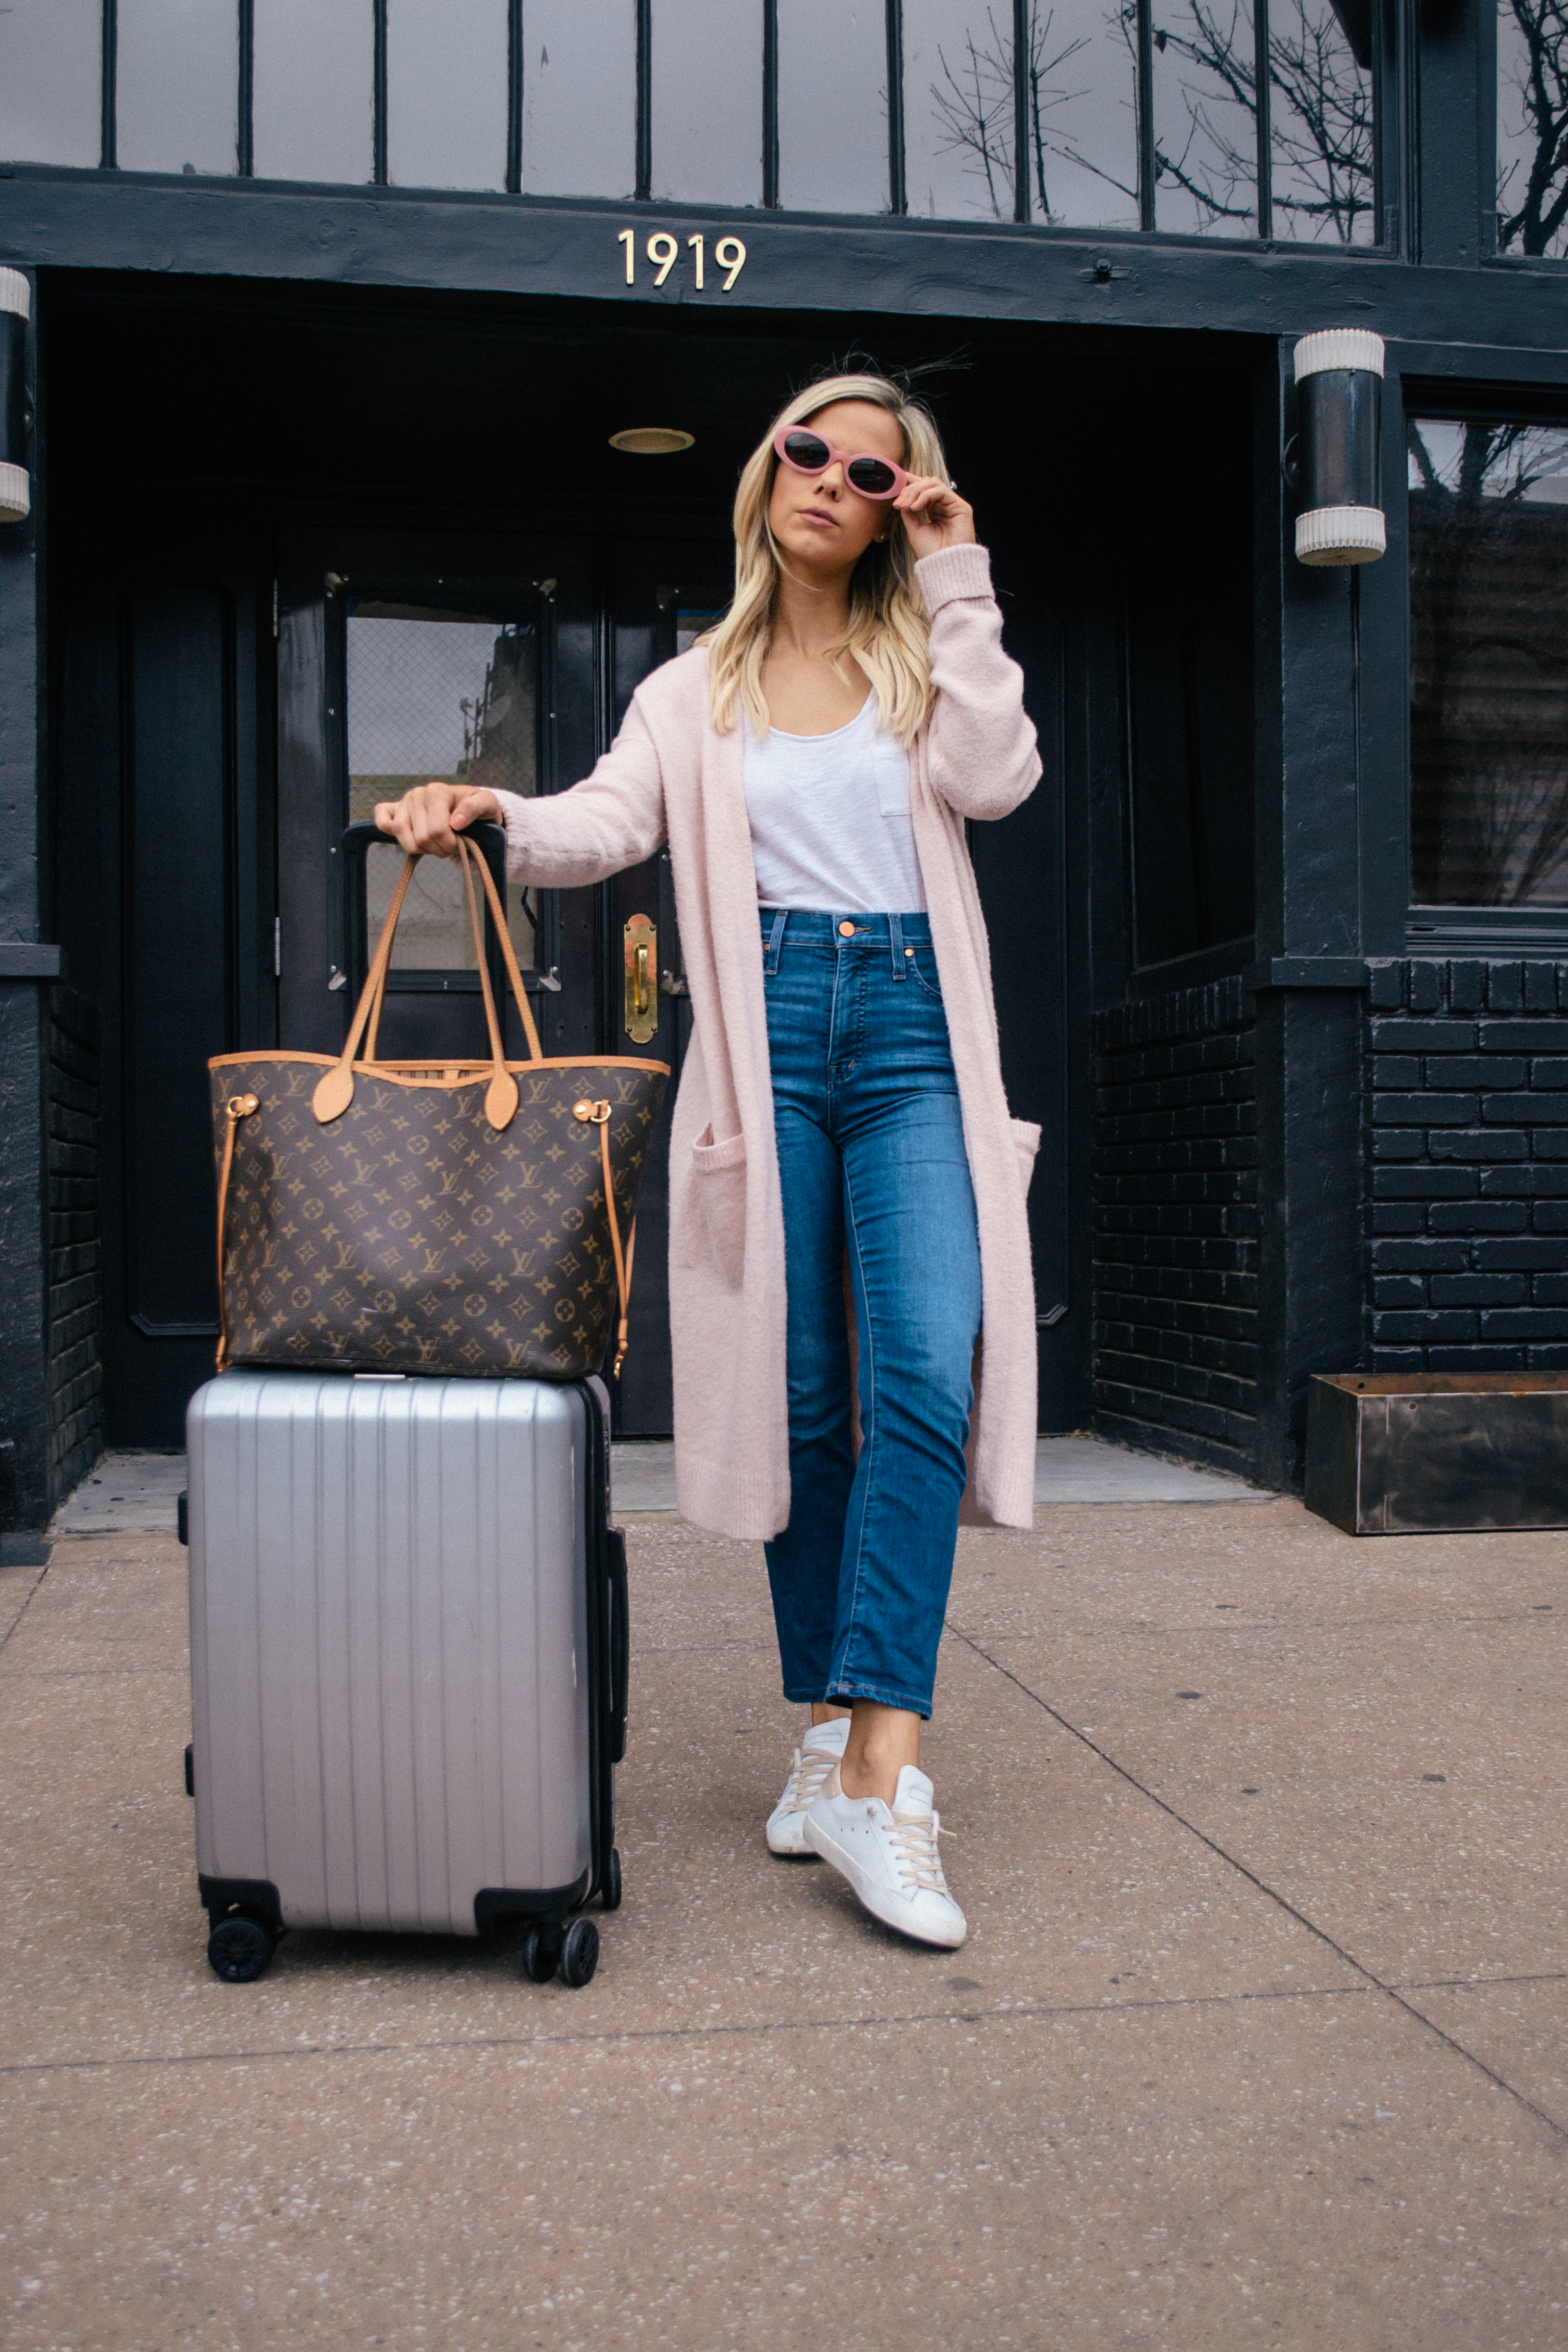 Cute and comfortable airport travel outfit #airportstyle #airportoutfit #traveloutfit #travelstyle #travel